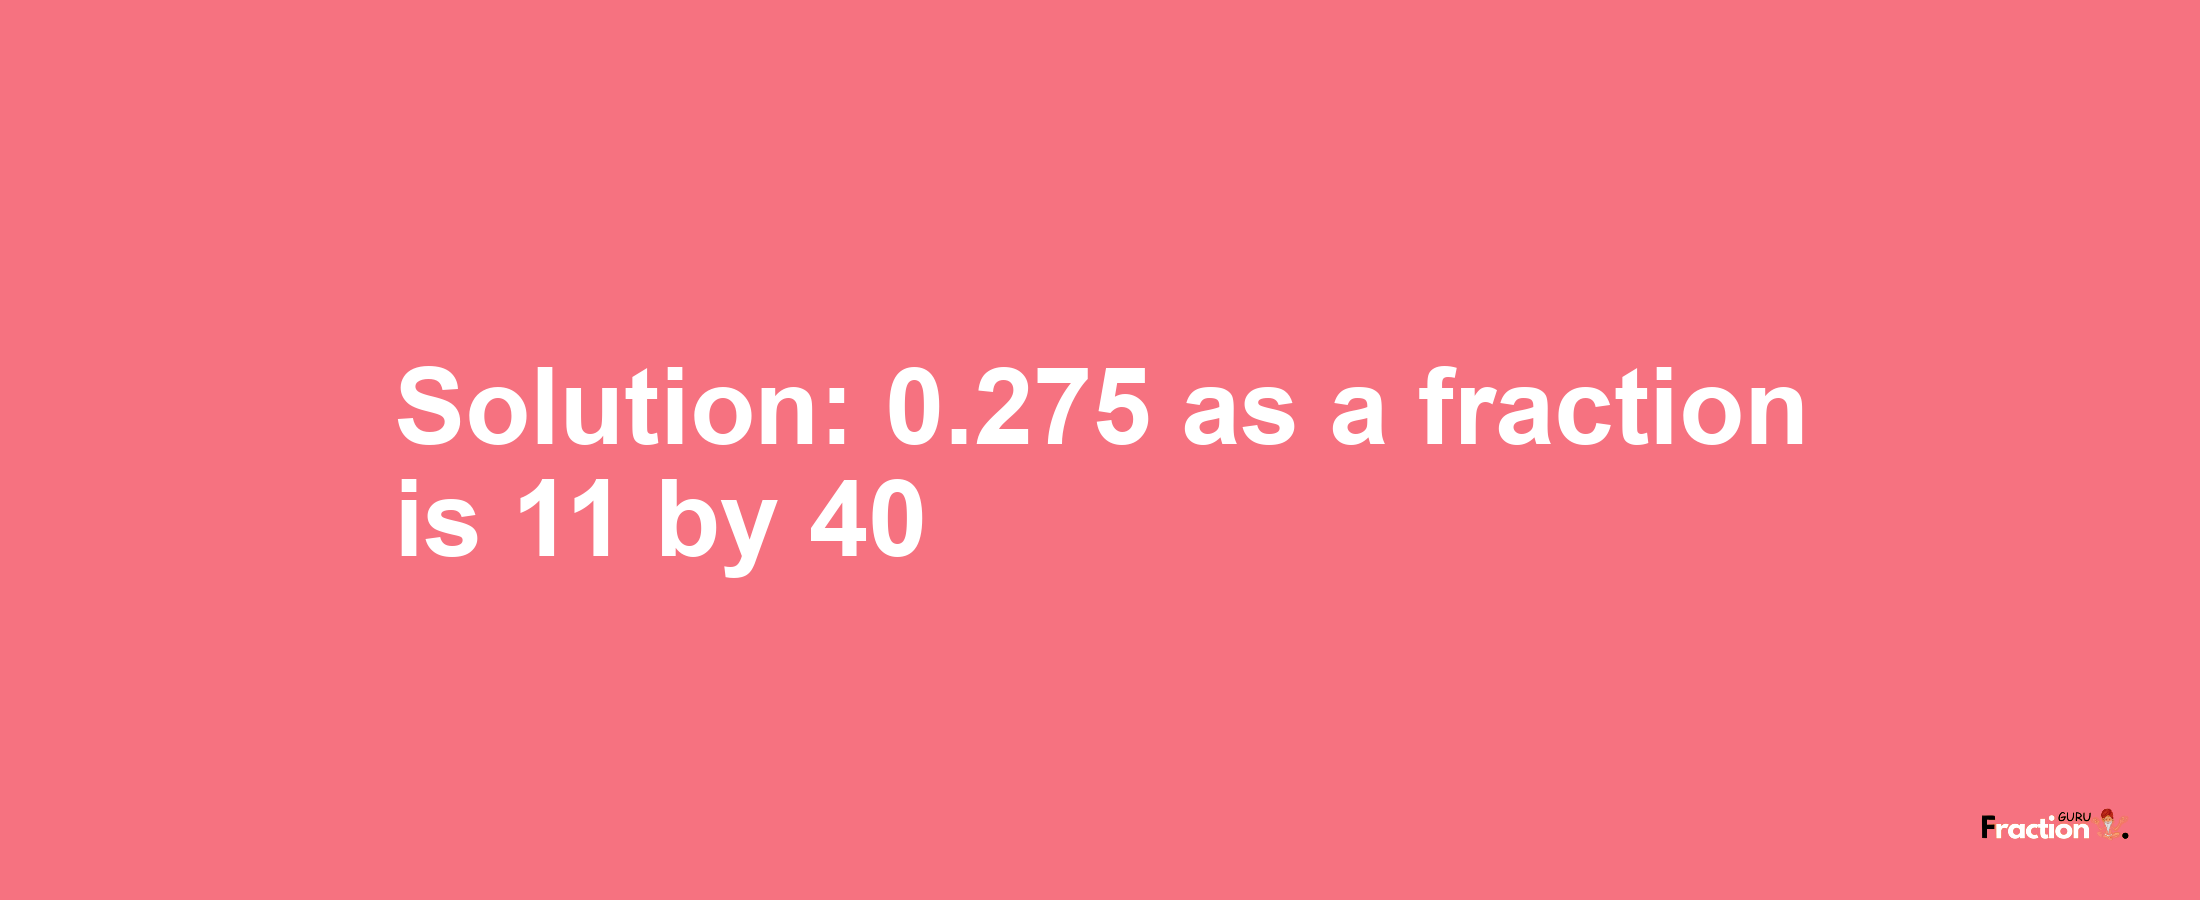 Solution:0.275 as a fraction is 11/40